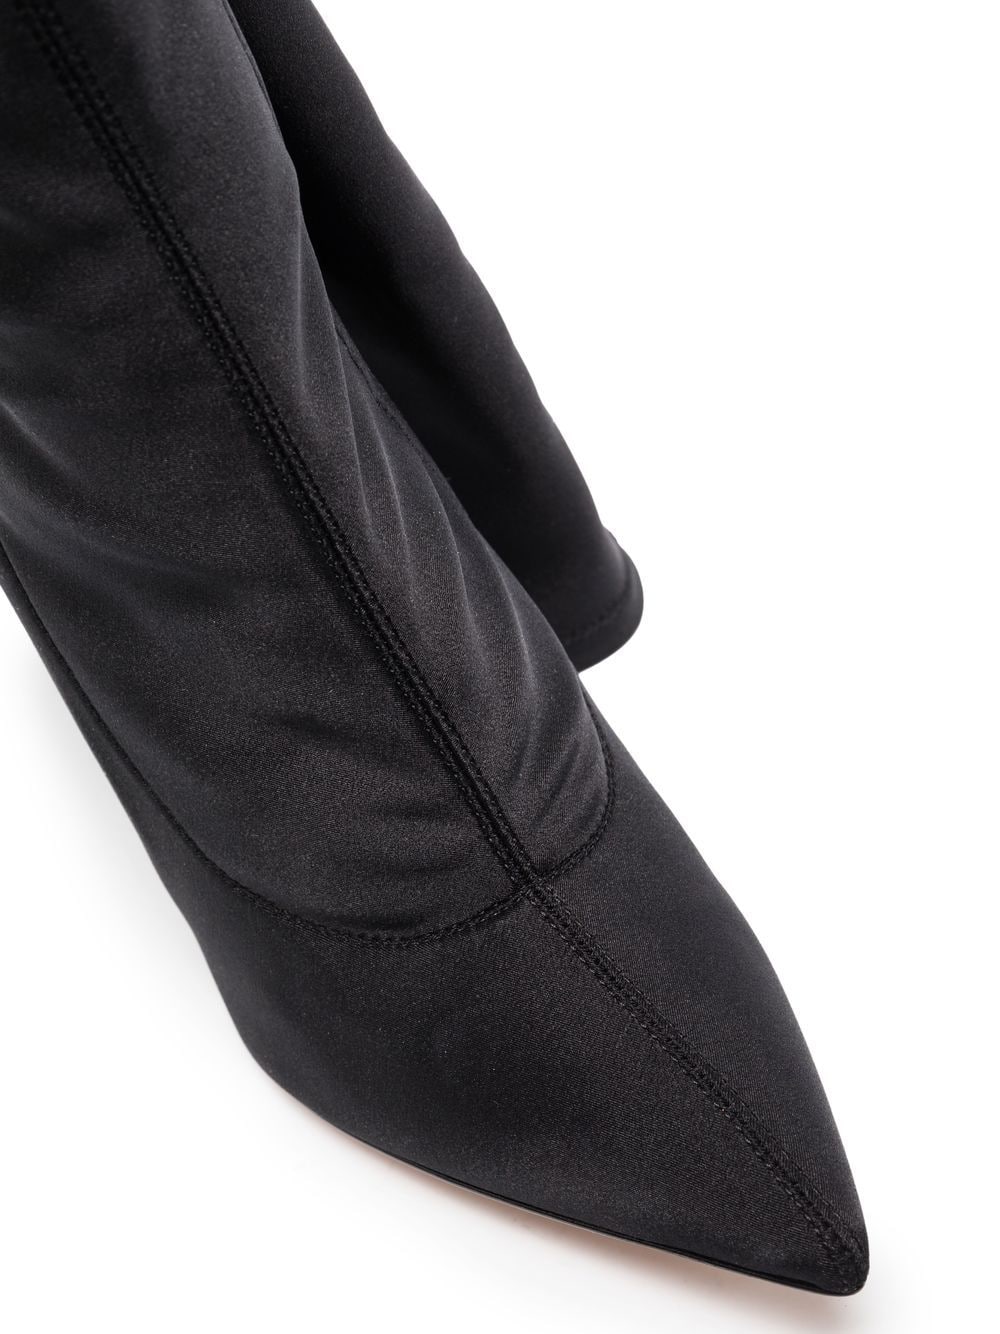 Image 2 of Gianvito Rossi curved heel over-the-knee boots